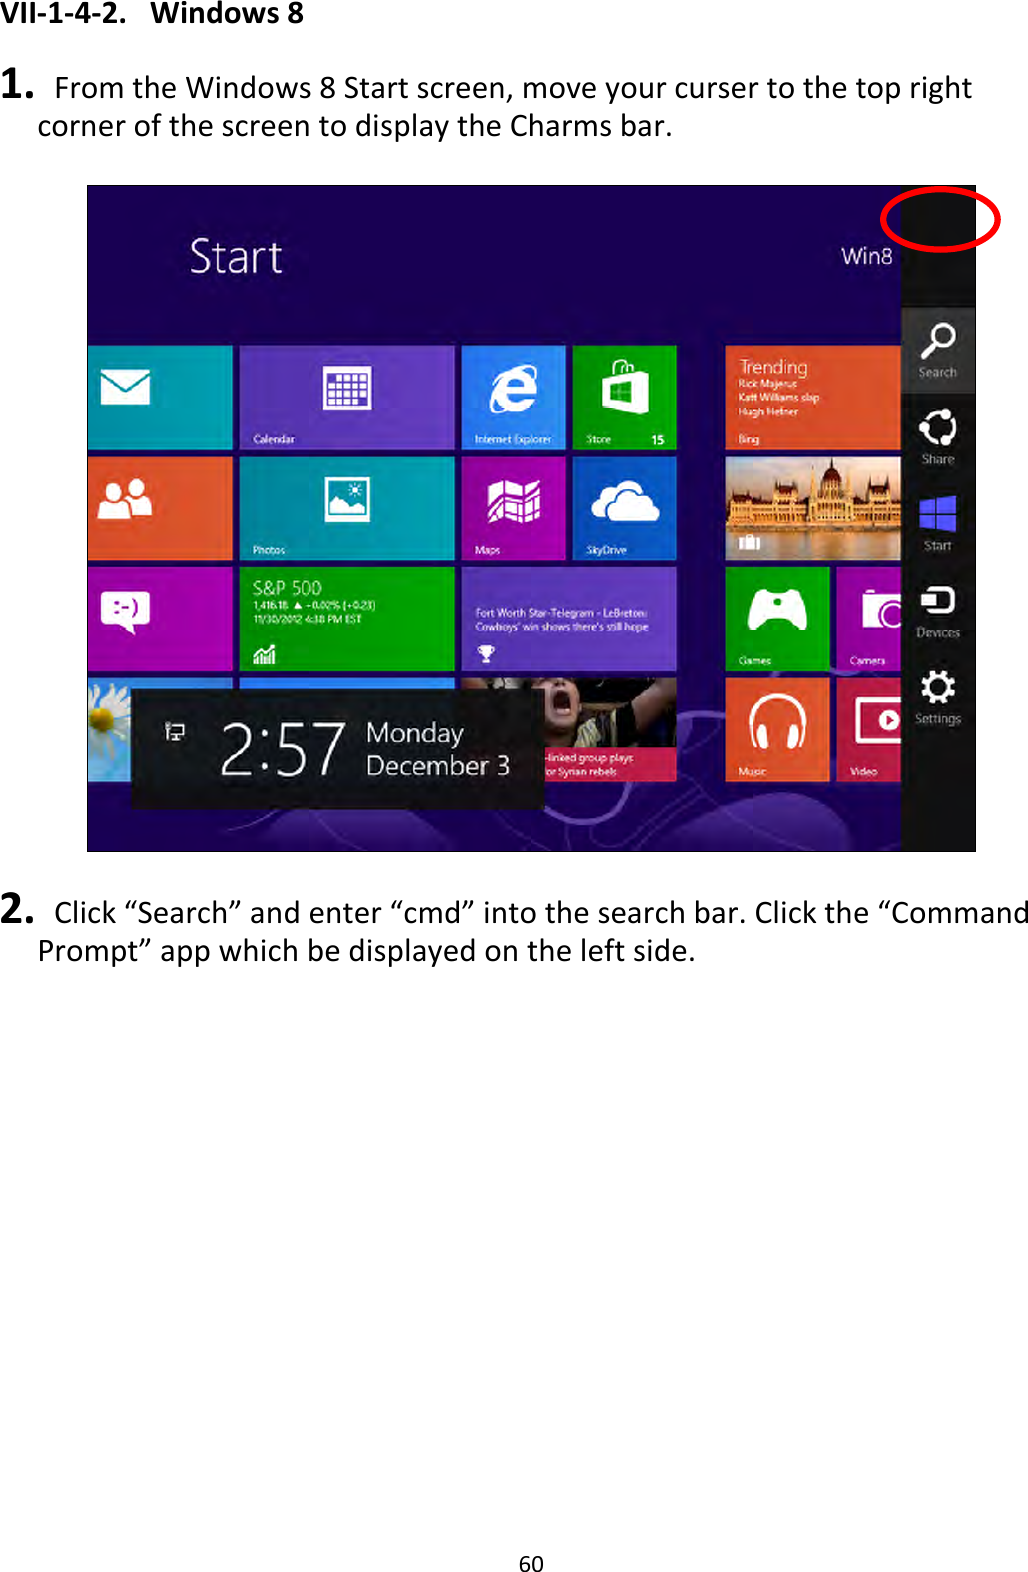 60 VII-1-4-2.  Windows 8  1.   From the Windows 8 Start screen, move your curser to the top right corner of the screen to display the Charms bar.    2.  Click “Search” and enter “cmd” into the search bar. Click the “Command Prompt” app which be displayed on the left side.  